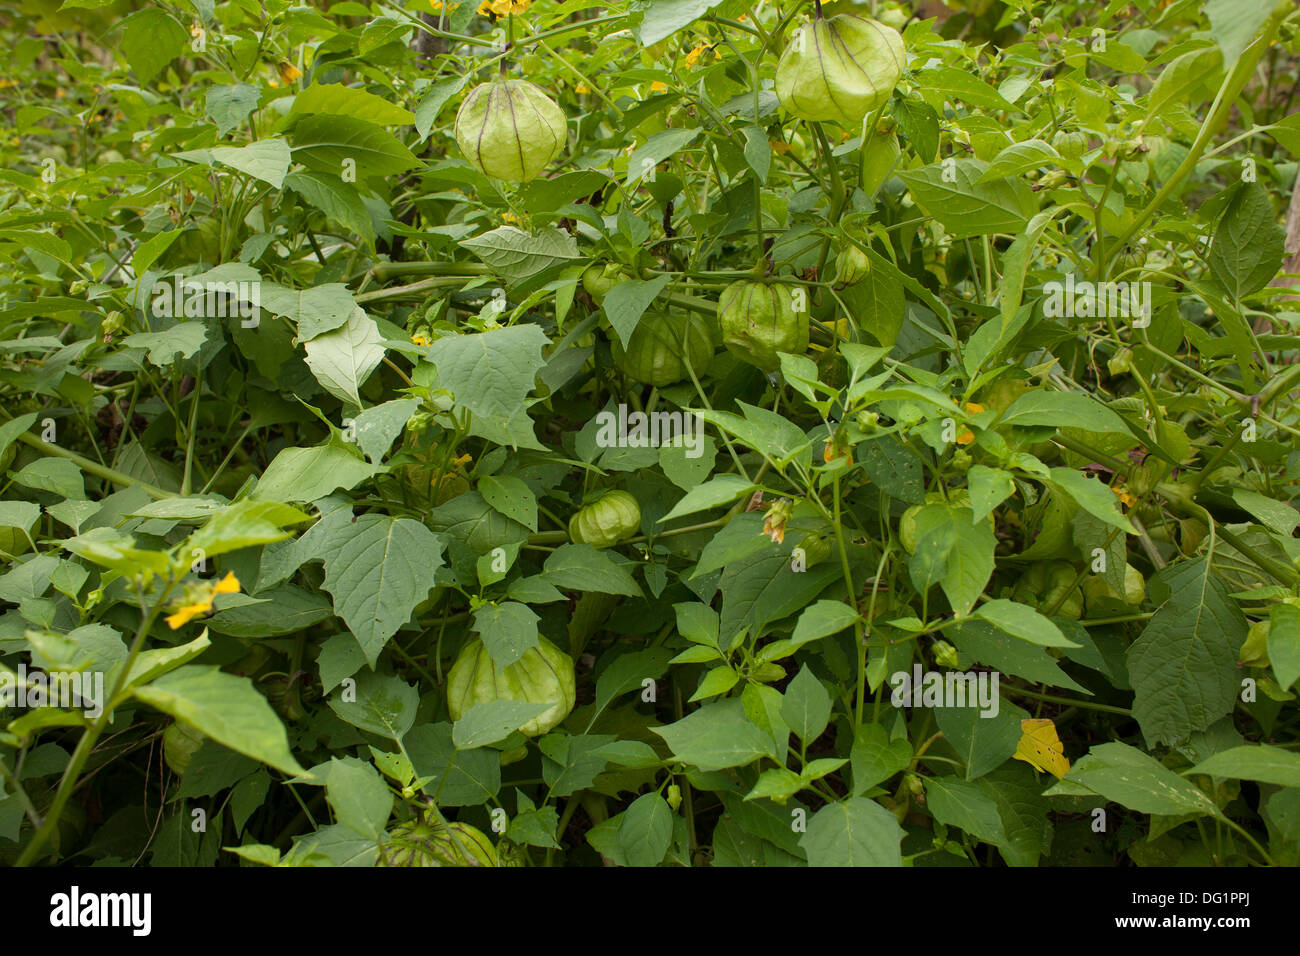 Tomatillos are still flowering near the end of the growing season. Stock Photo